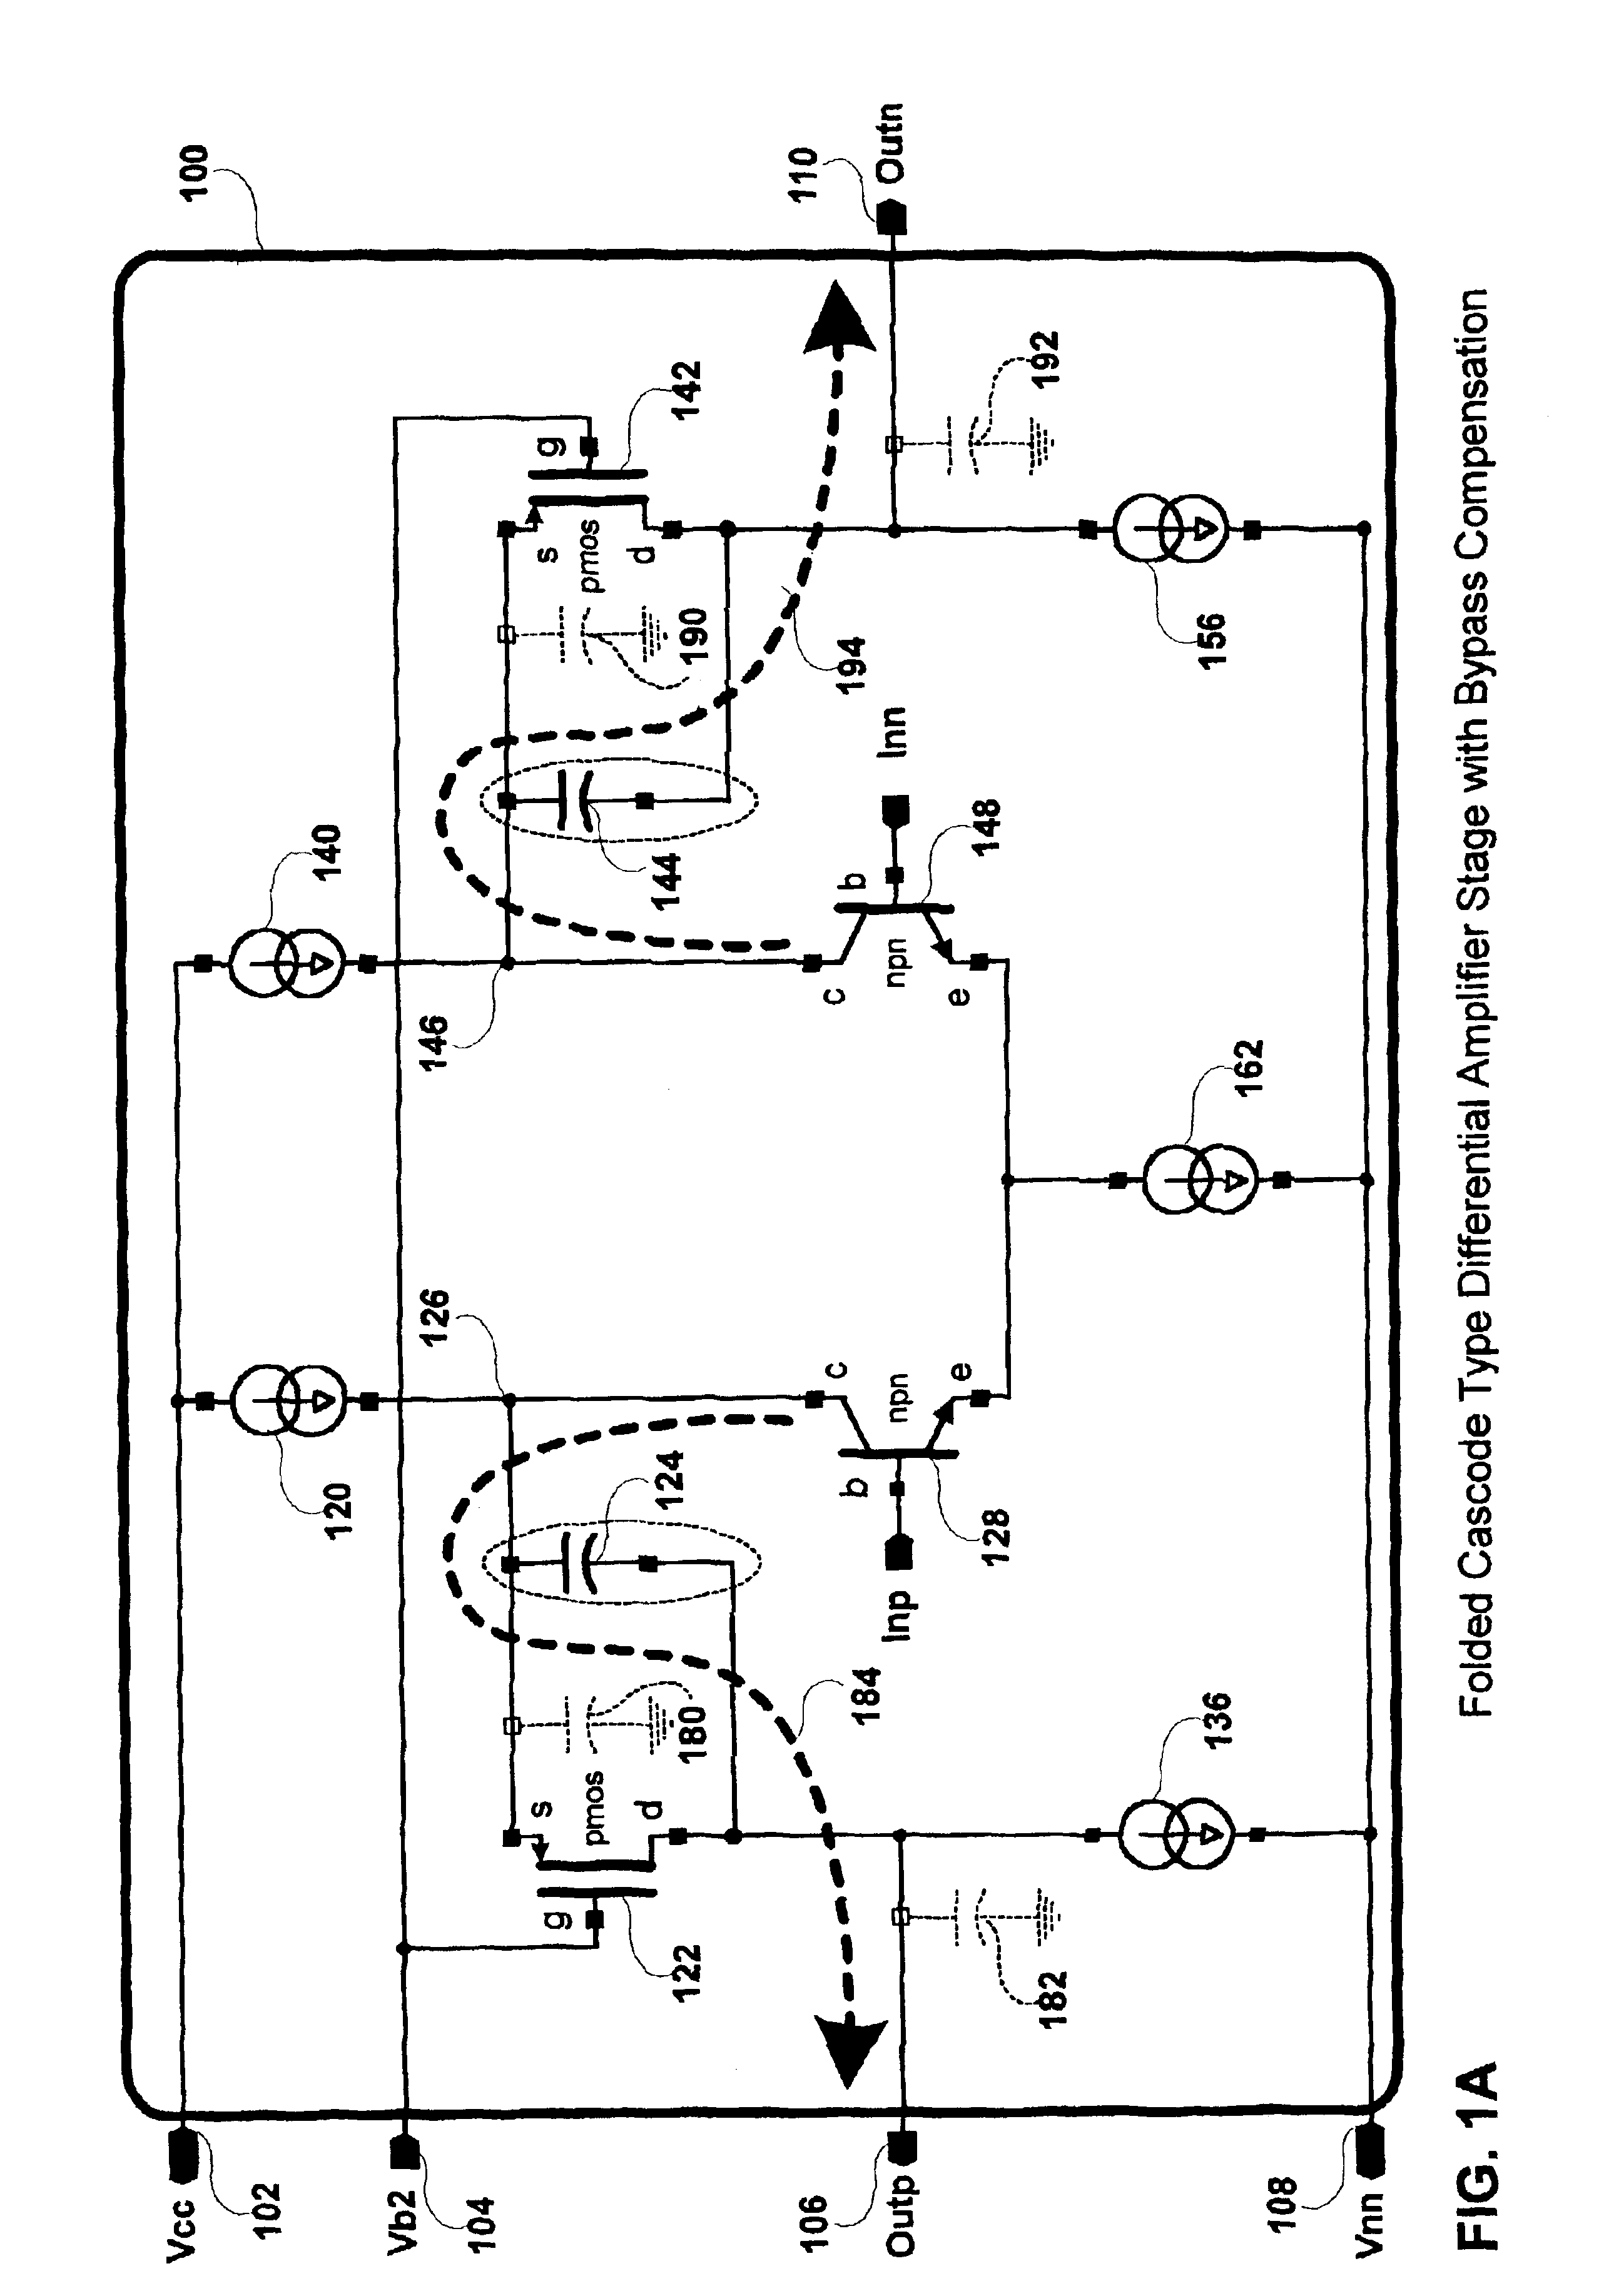 Method and apparatus for compensating an amplifier